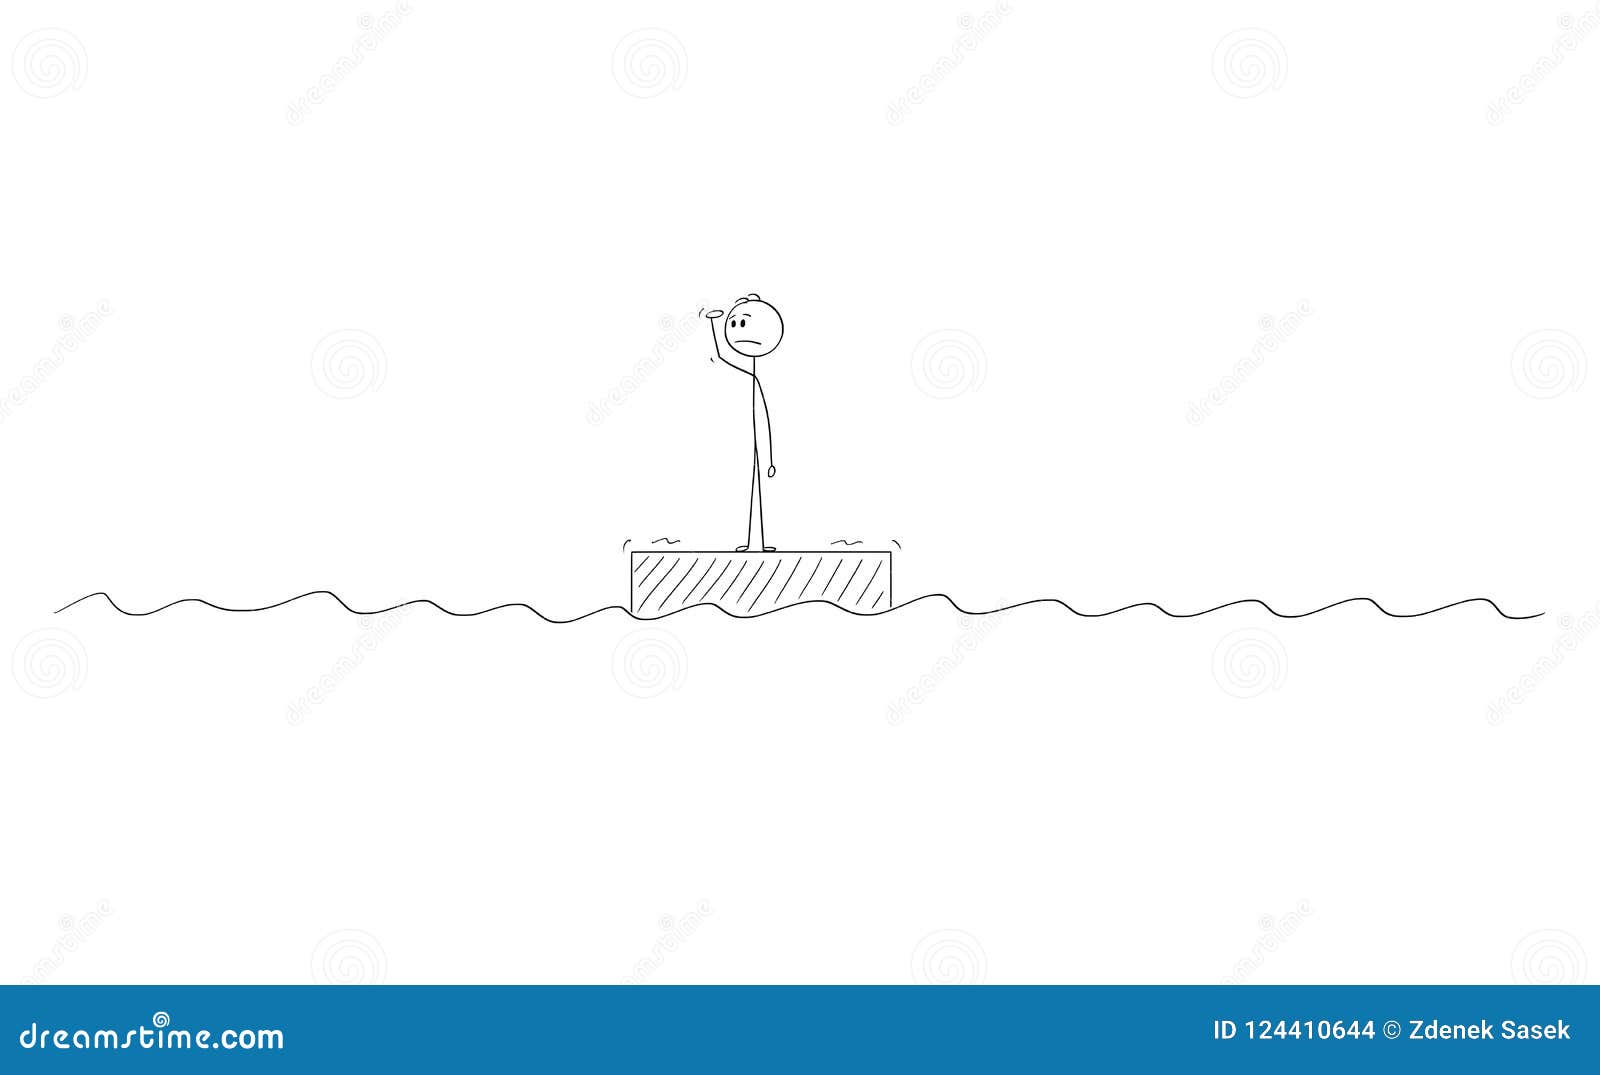 Cartoon Of Man Or Businessman Standing Alone On The Raft In The Middle Of Ocean Stock Vector Illustration Of Graphic Loneliness